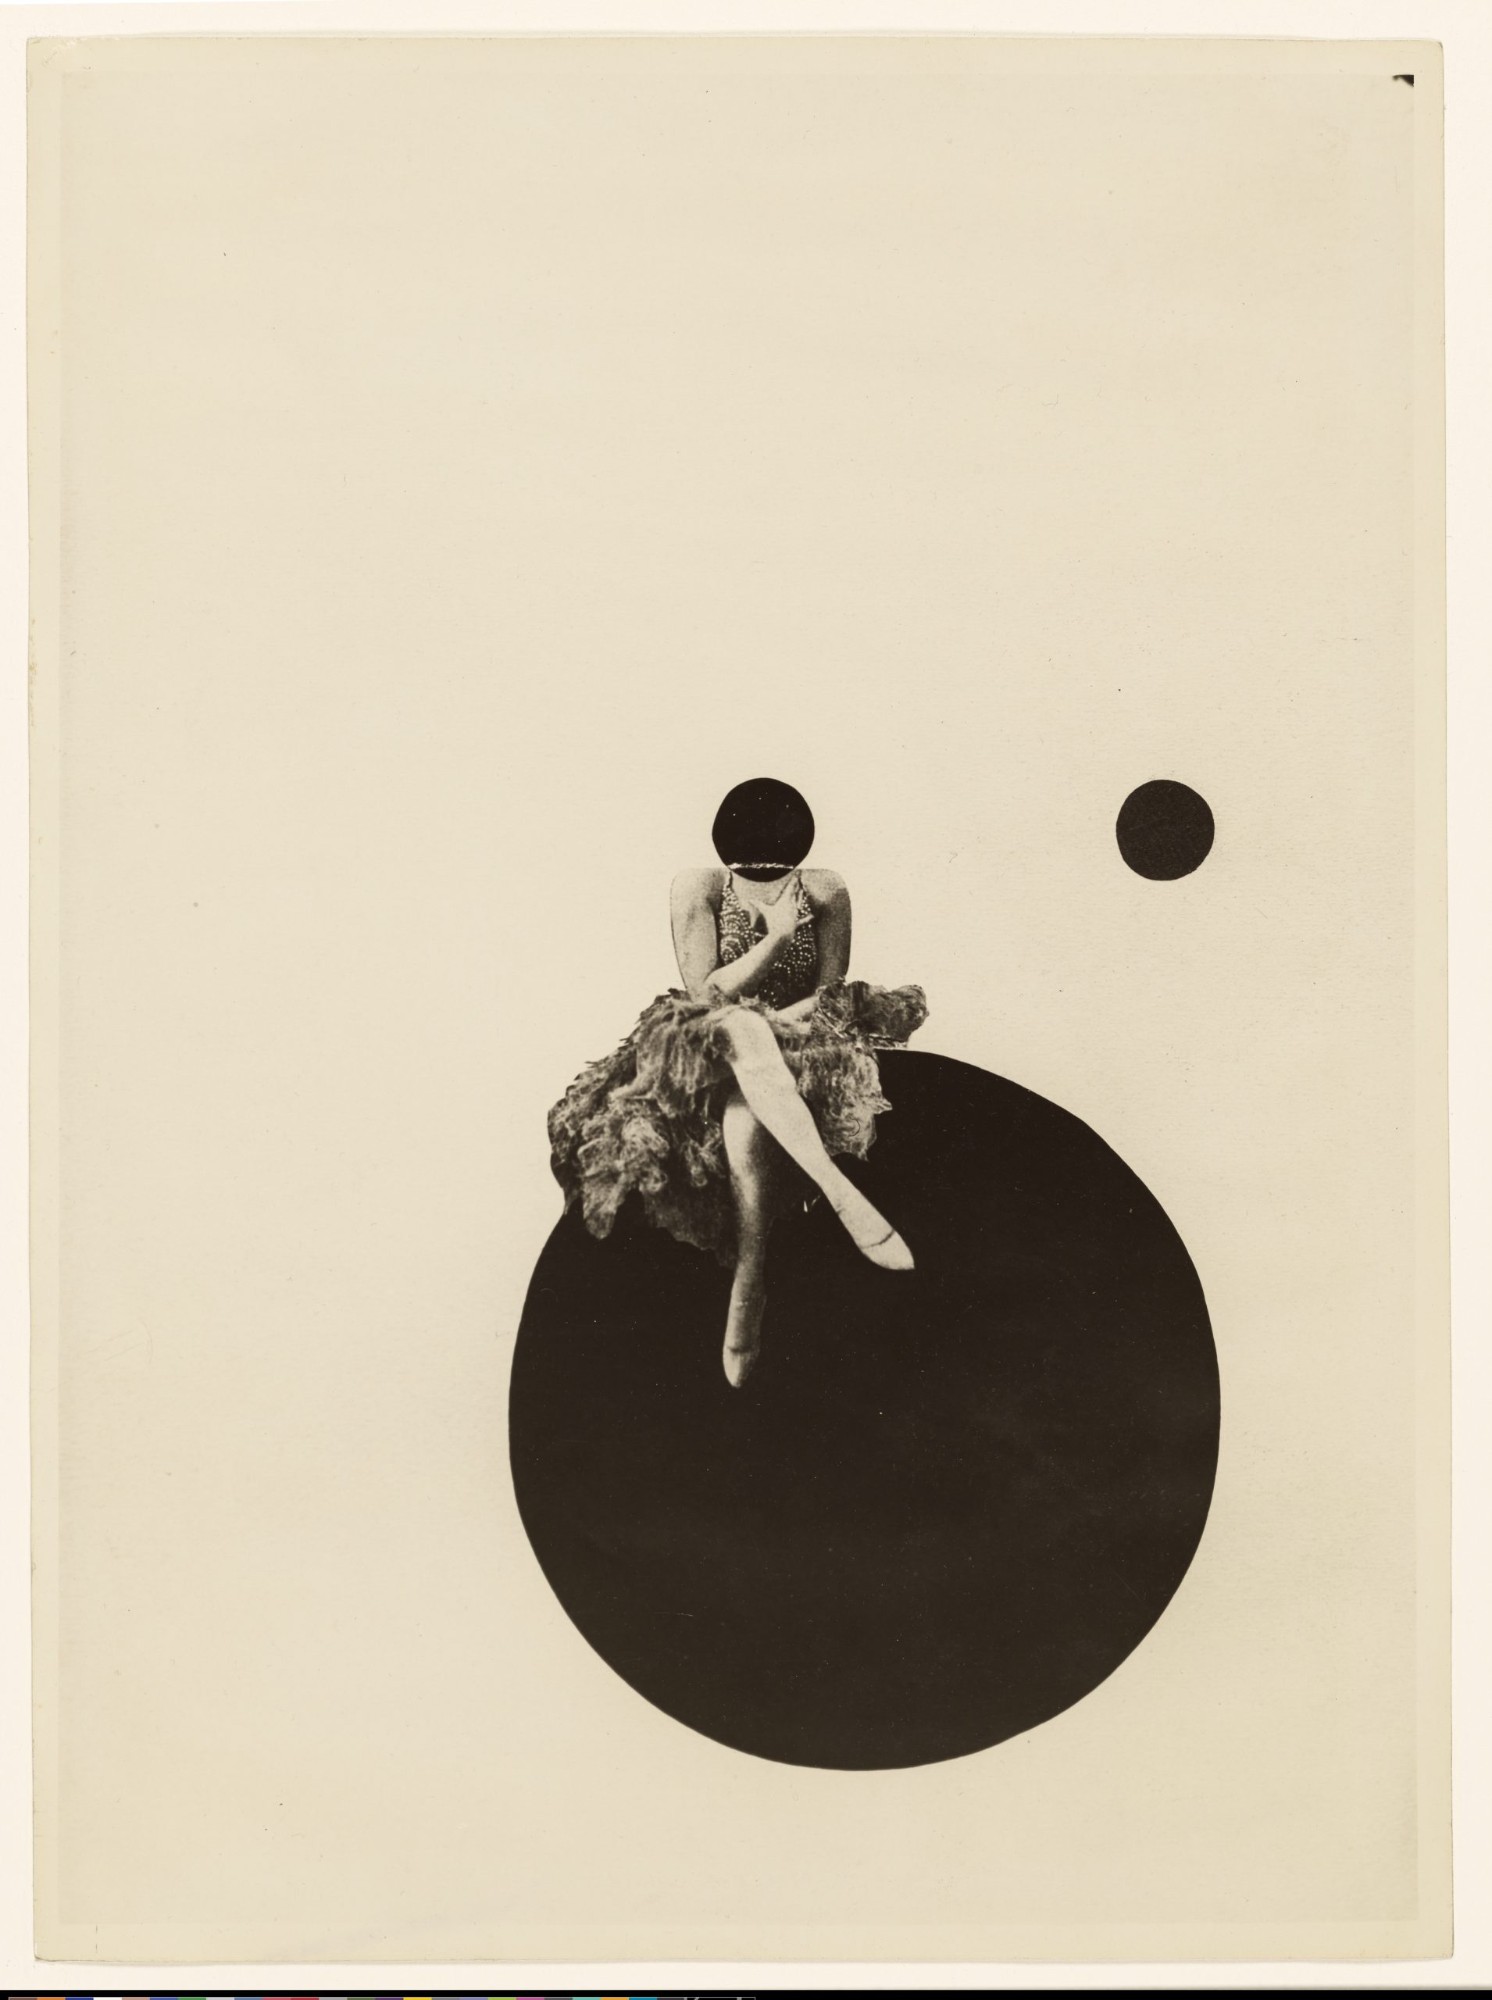 Olly and Dolly Sisters, 1925 © Estate of László Moholy-Nagy / Artists Rights Society (ARS), New York